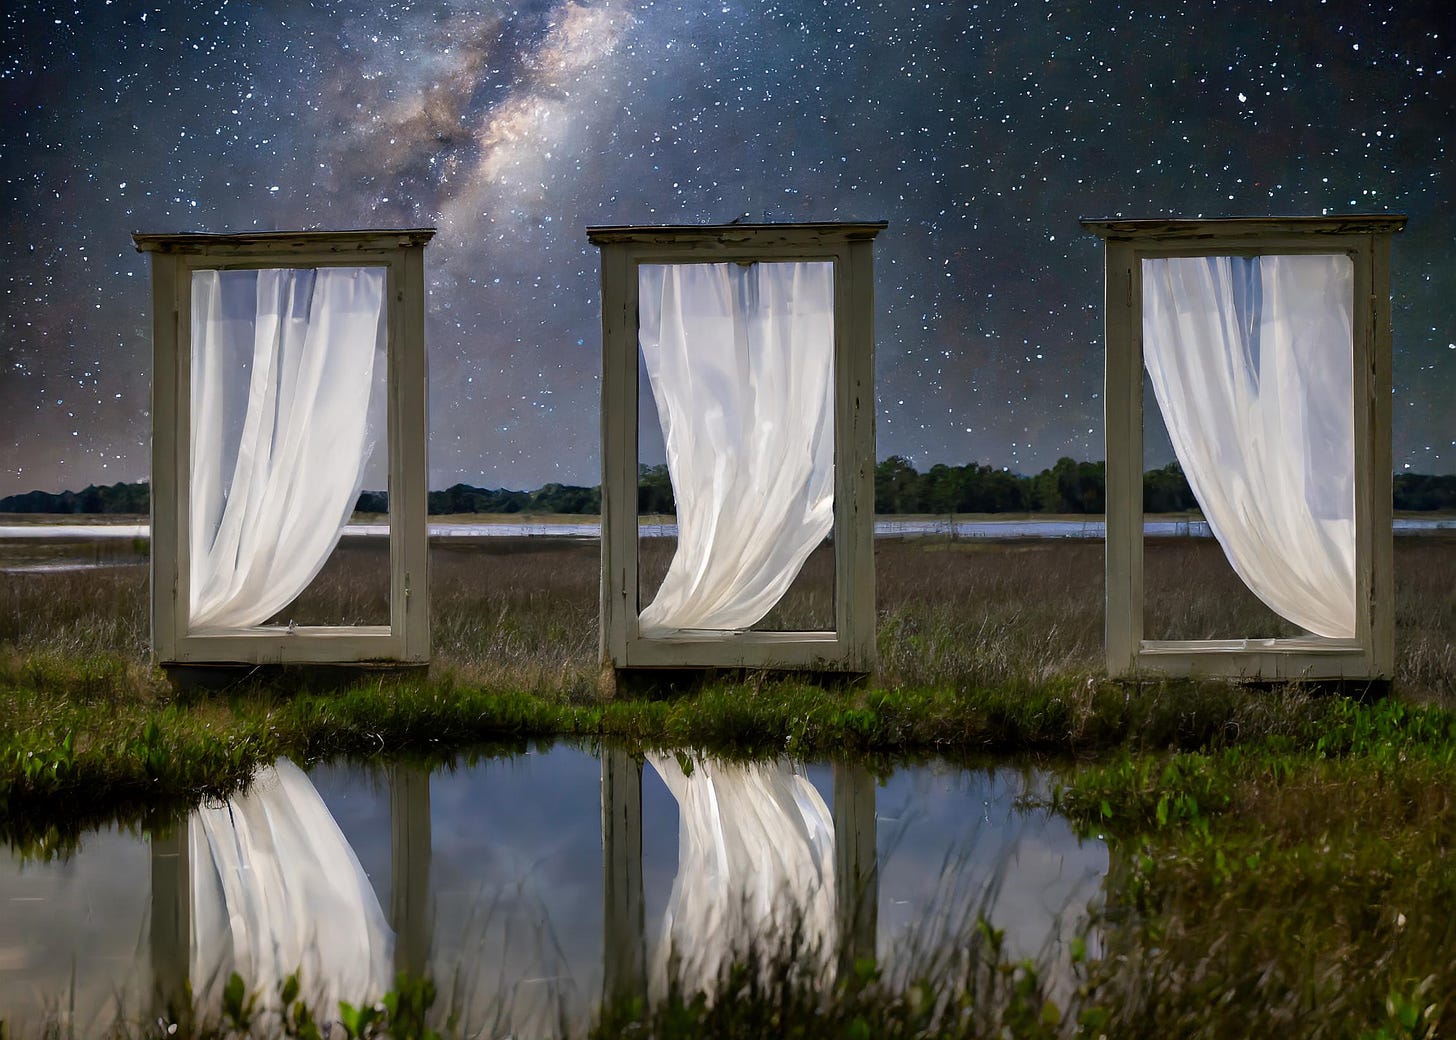 surreal image of three windows with billowing white curtains on open marsh against night sky